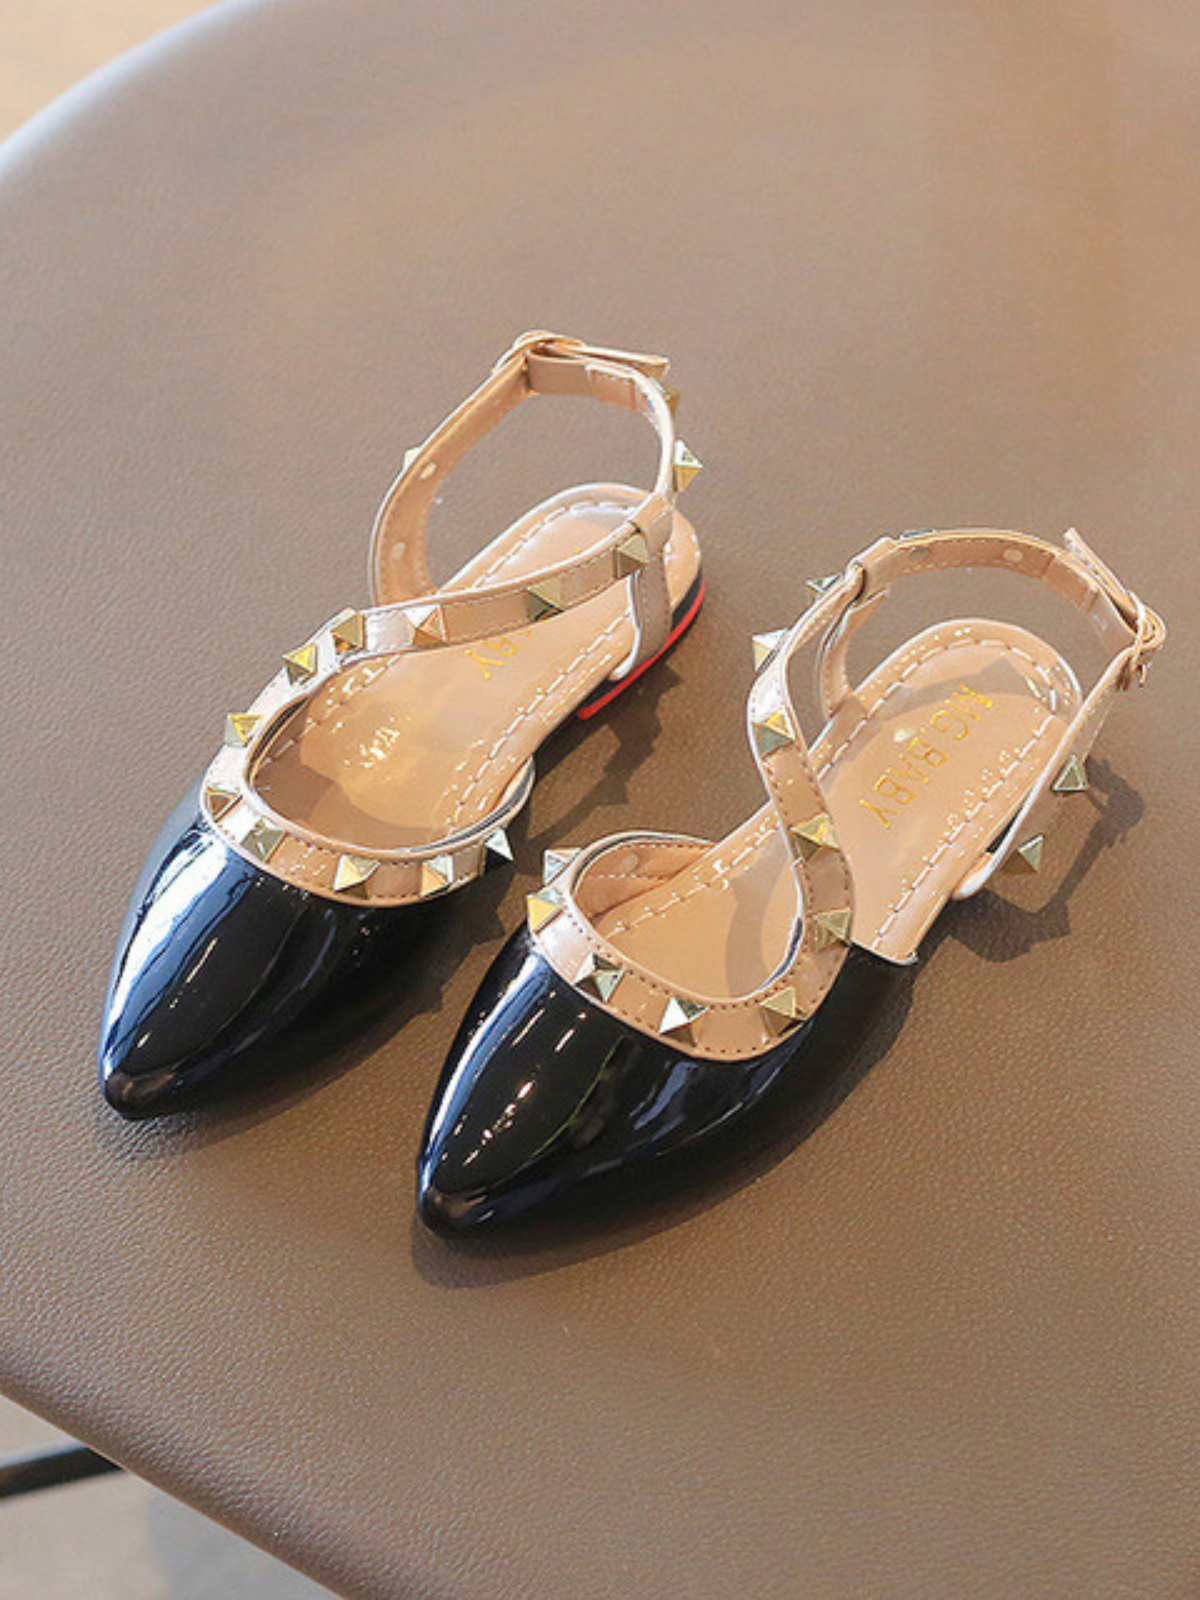 Toddler Shoes By Liv & Mia | Girls Studded Patent Leather Mule Flats